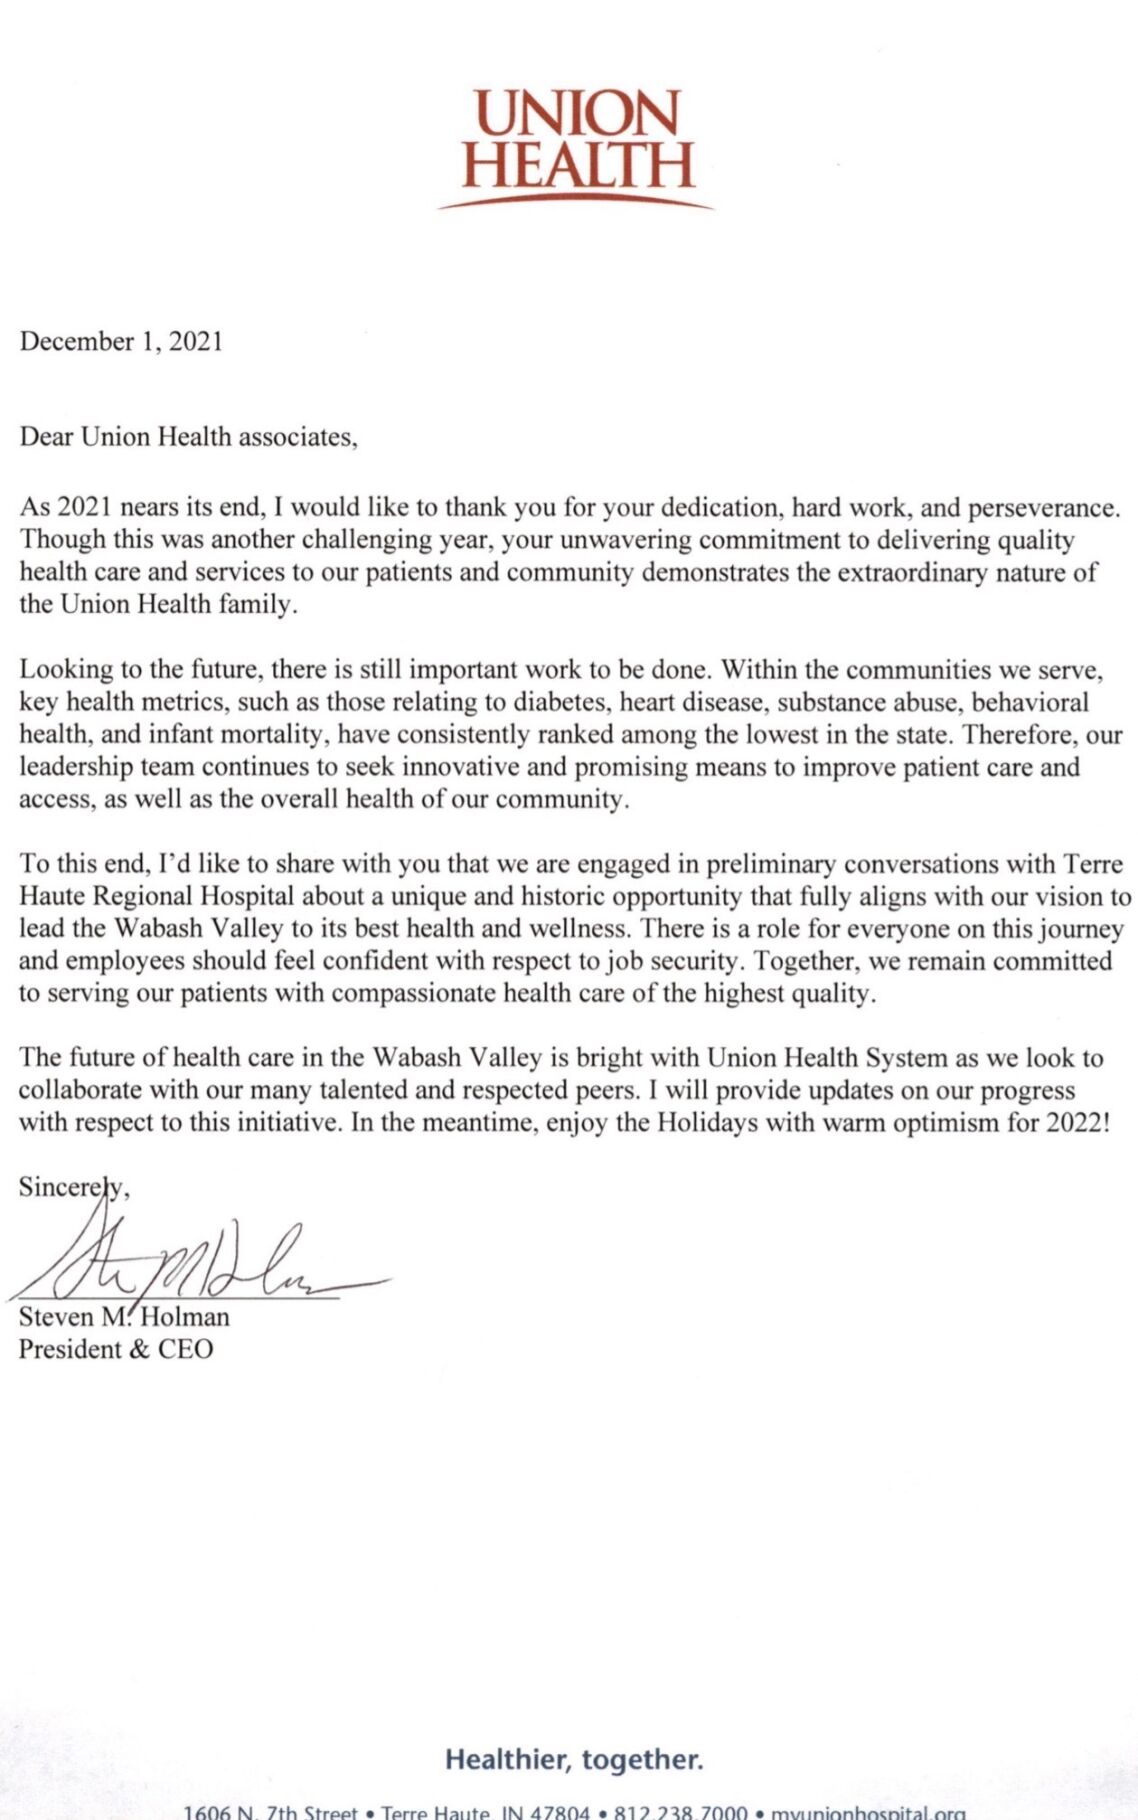 Union Health Letter to Employees